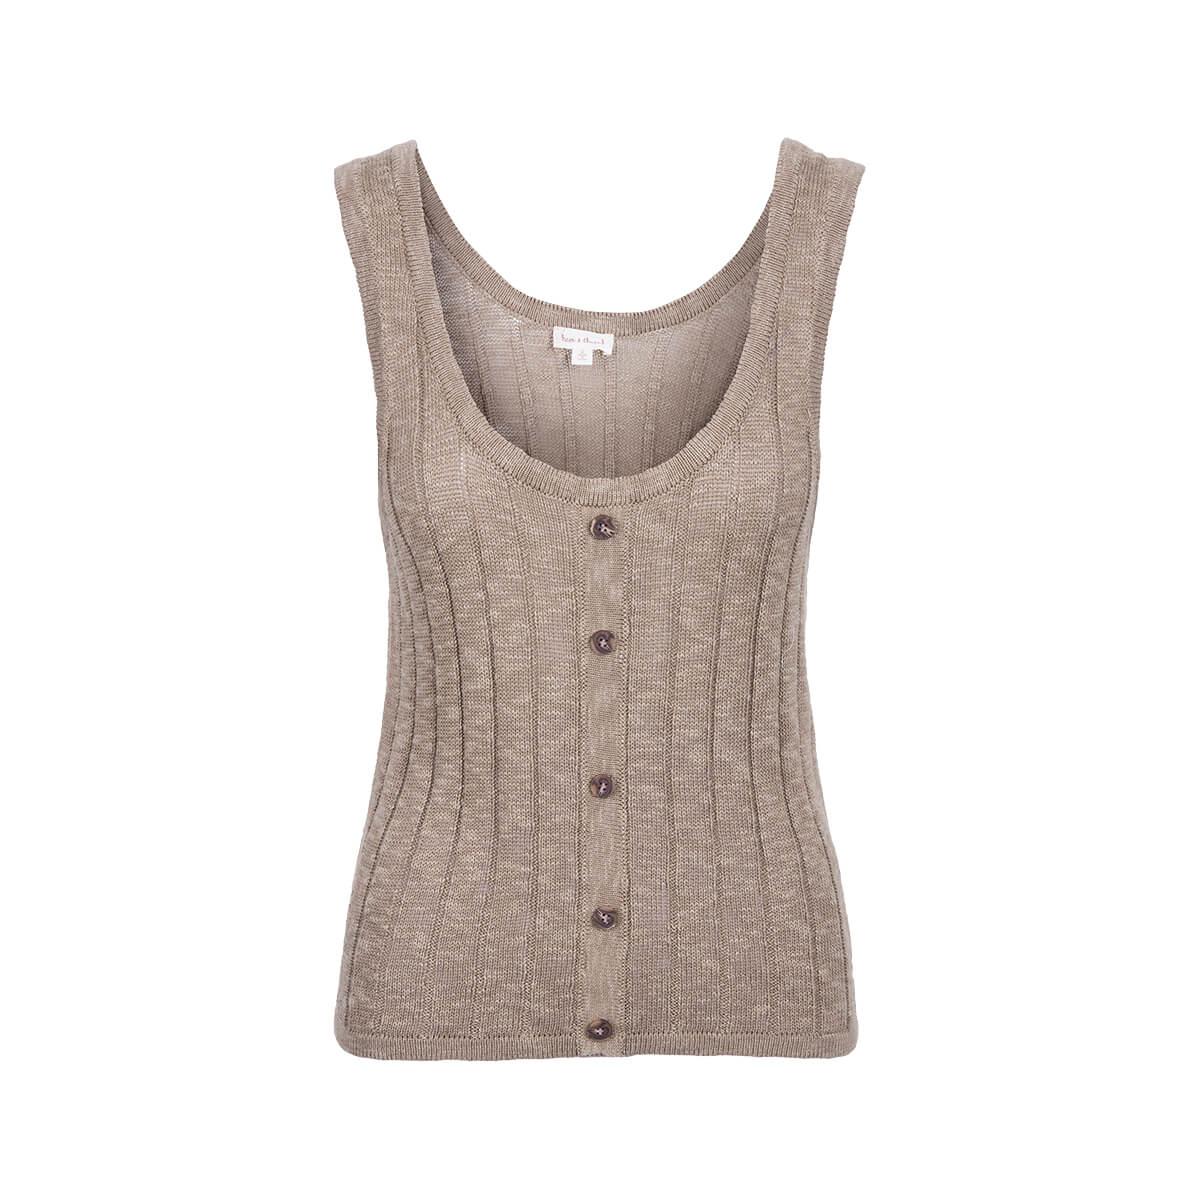  Women's Ribbed Button Down Sleeveless Sweater Top